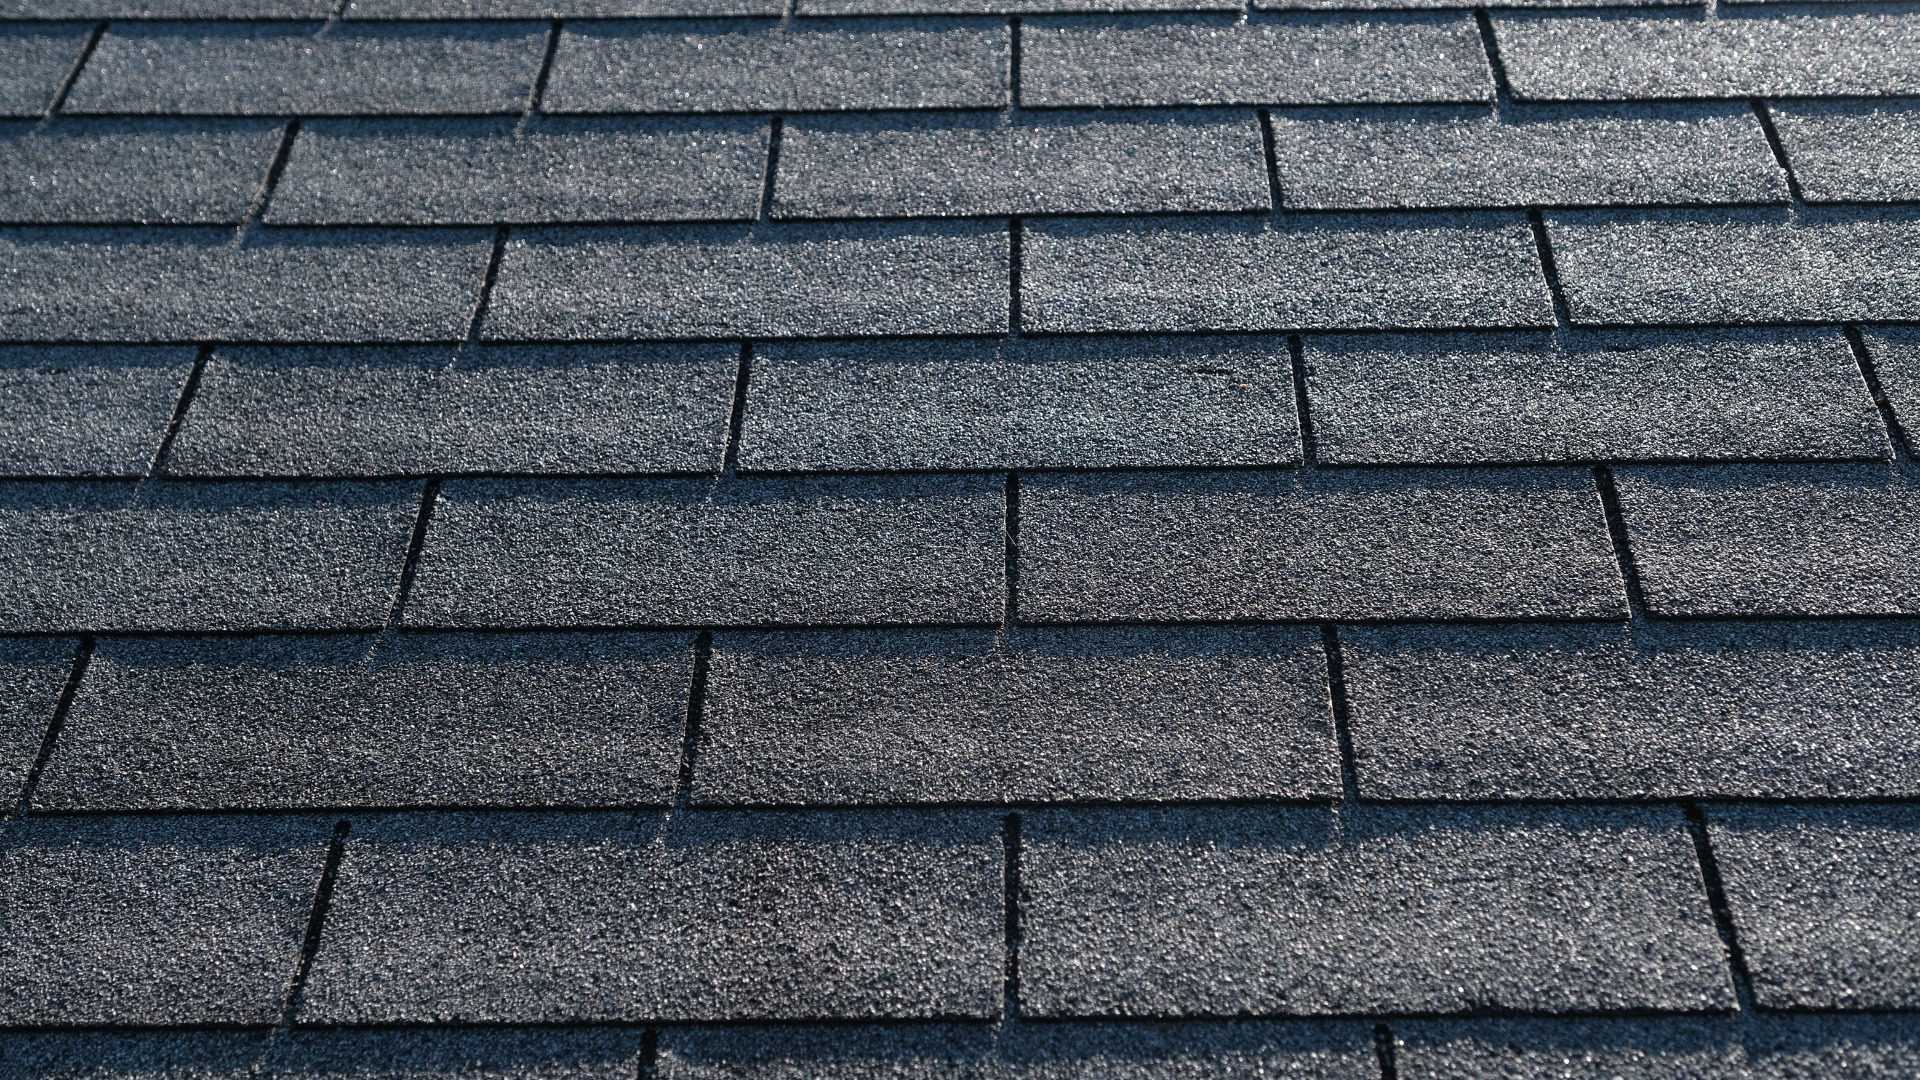 3-tab roof shingle installed on a home.